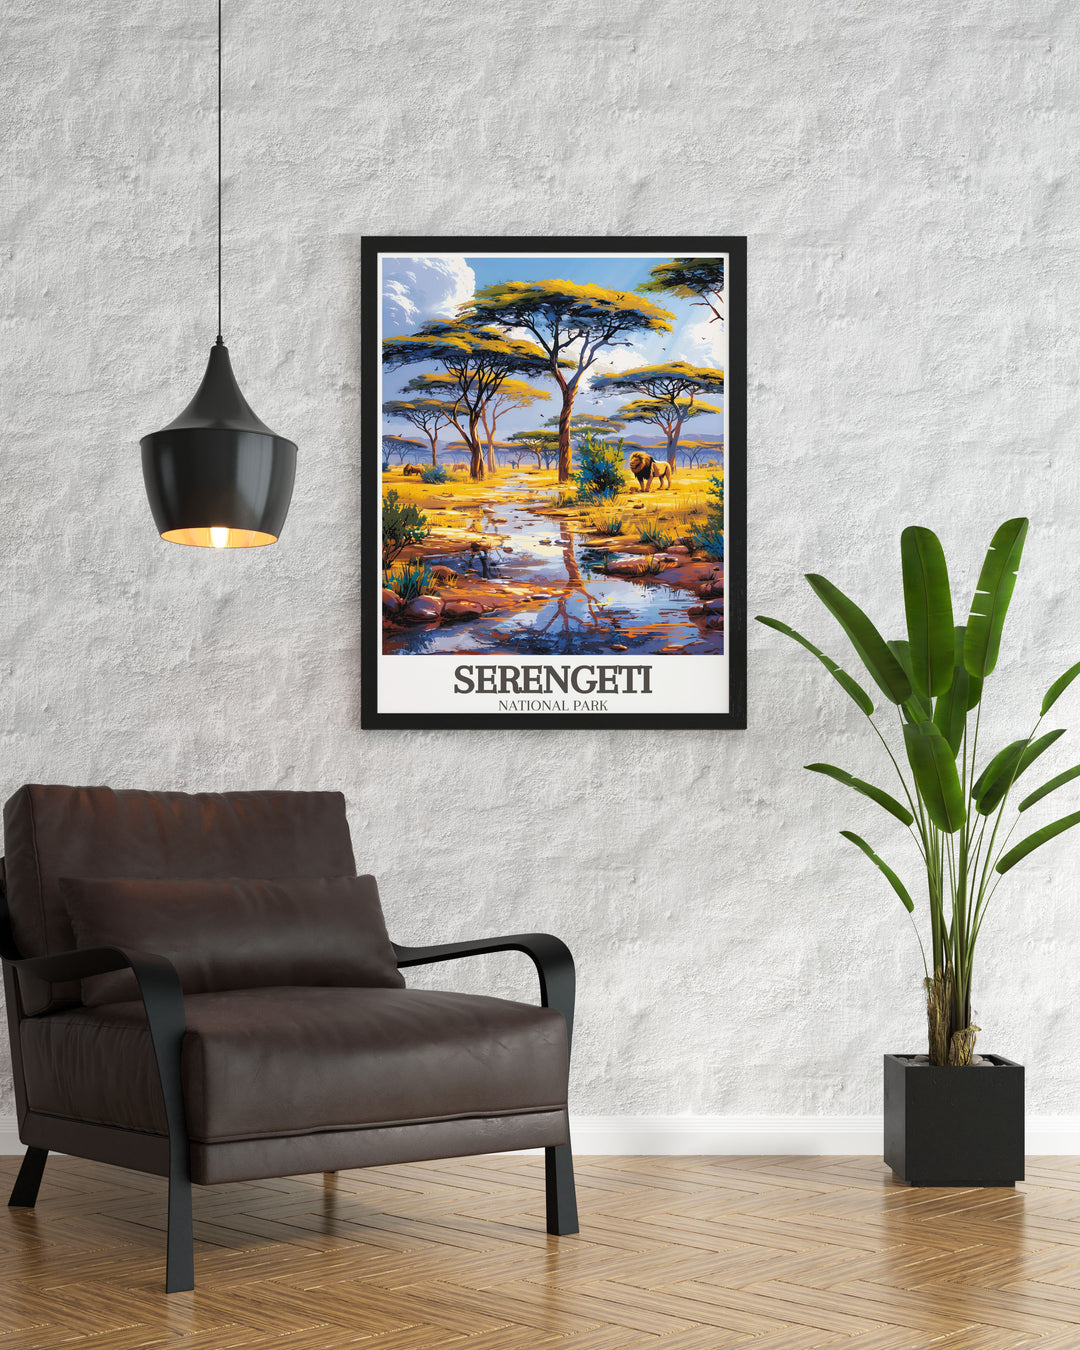 Tanzania poster featuring Acacia tree Wildlife savanna scene a captivating artwork that brings the wild beauty of Africa to your walls